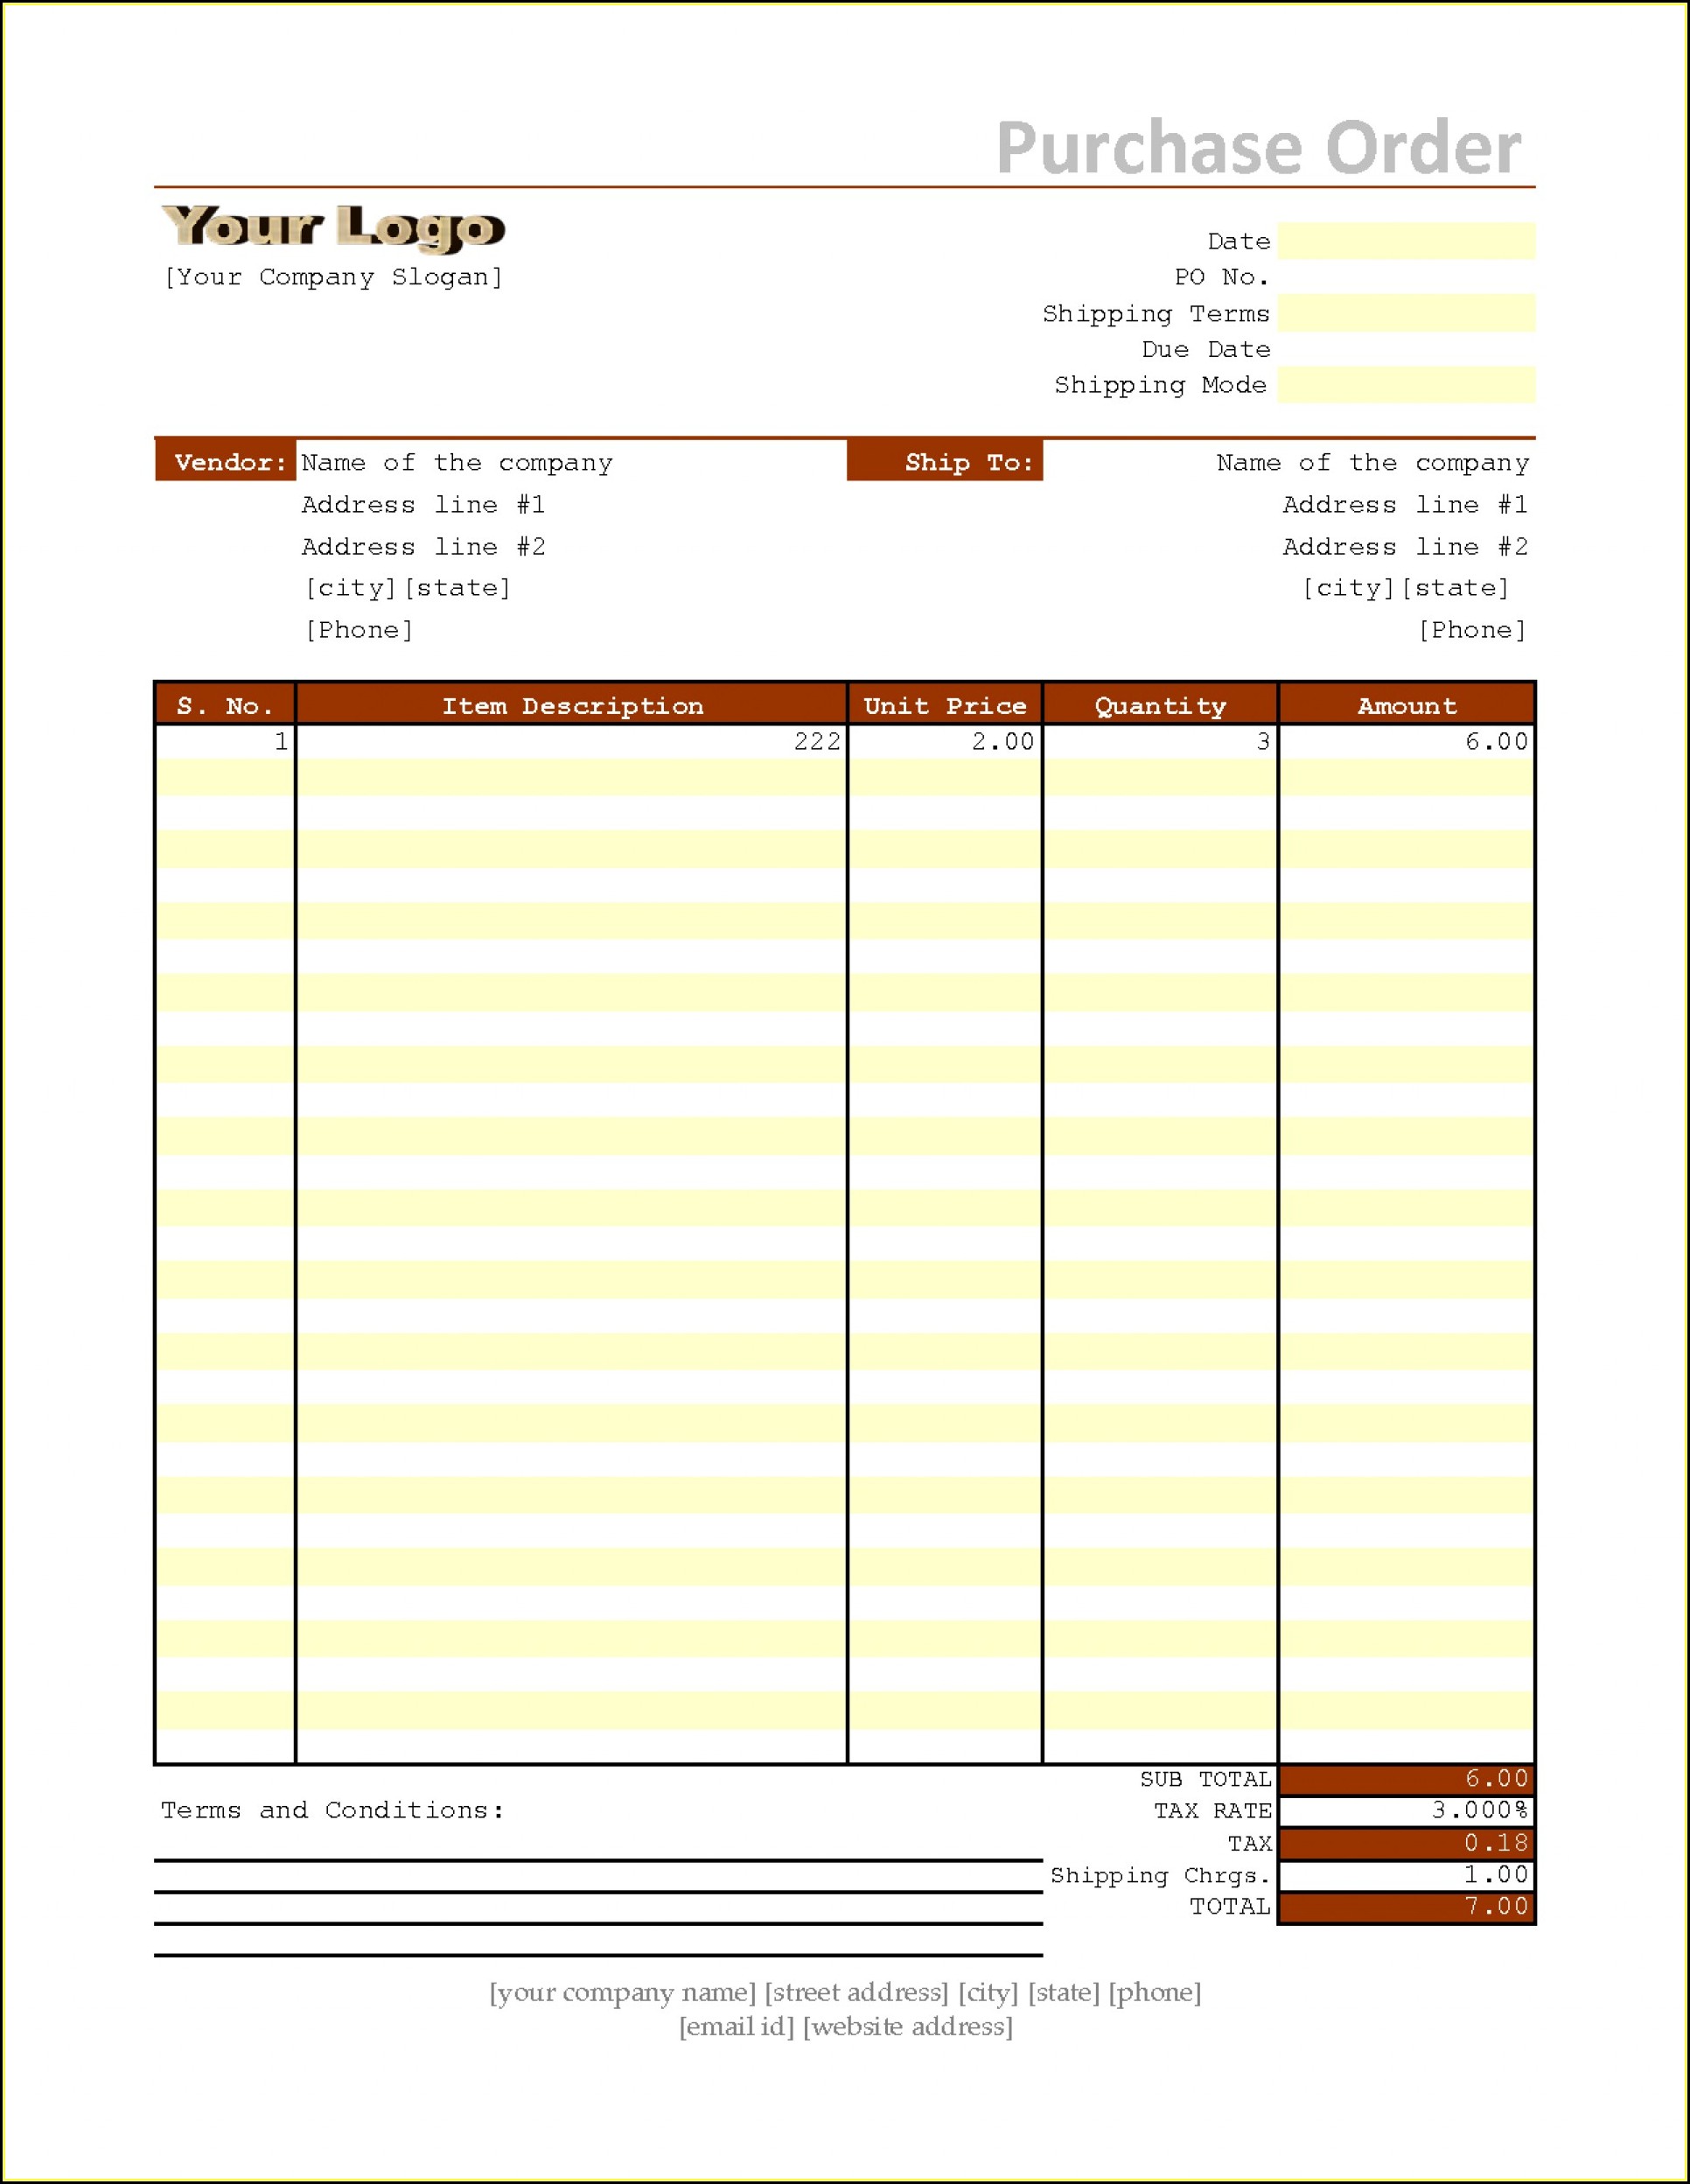 Purchase Order Sample Excel Free Download